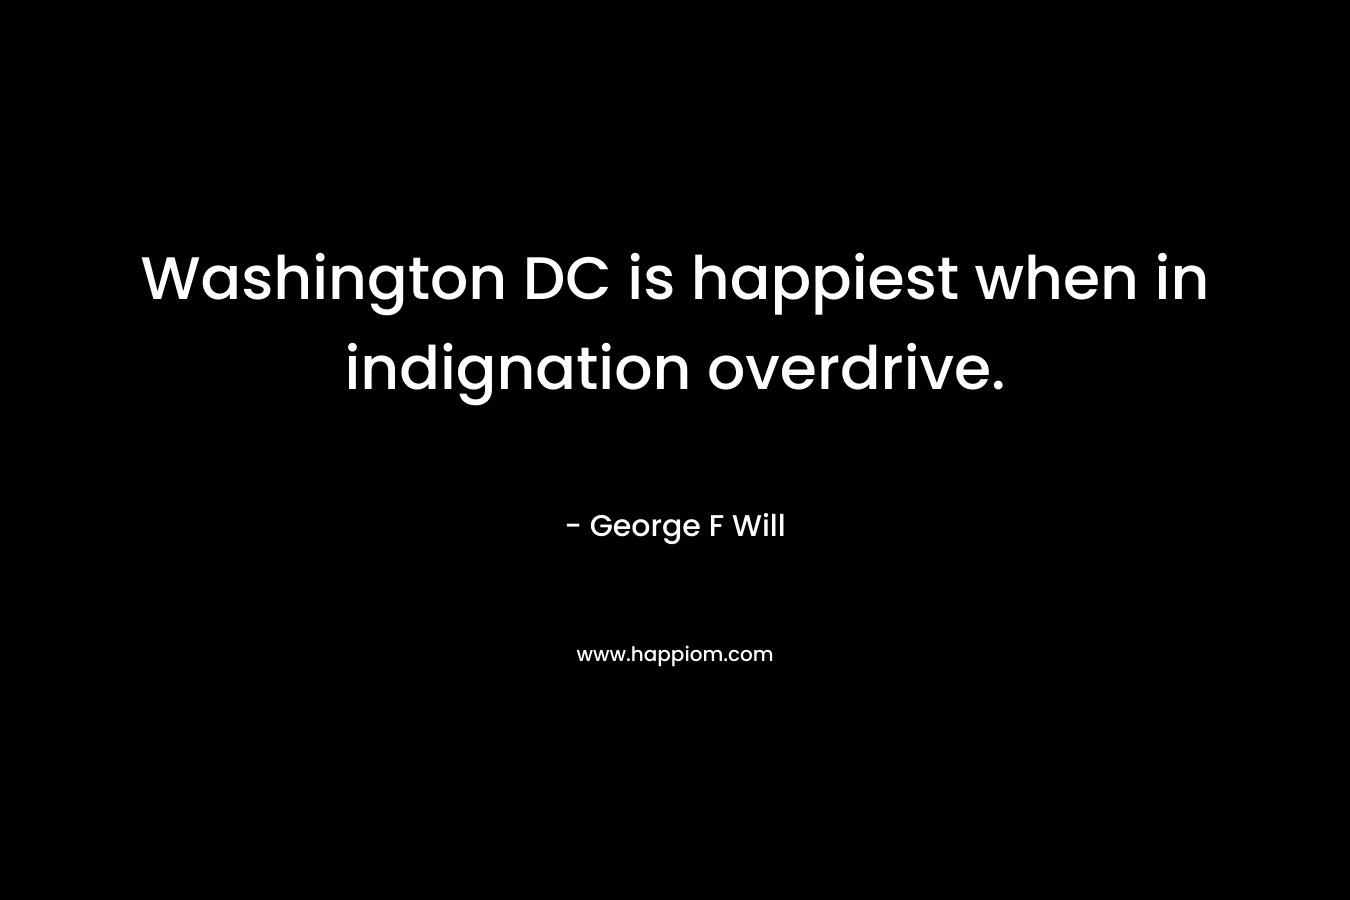 Washington DC is happiest when in indignation overdrive. – George F Will